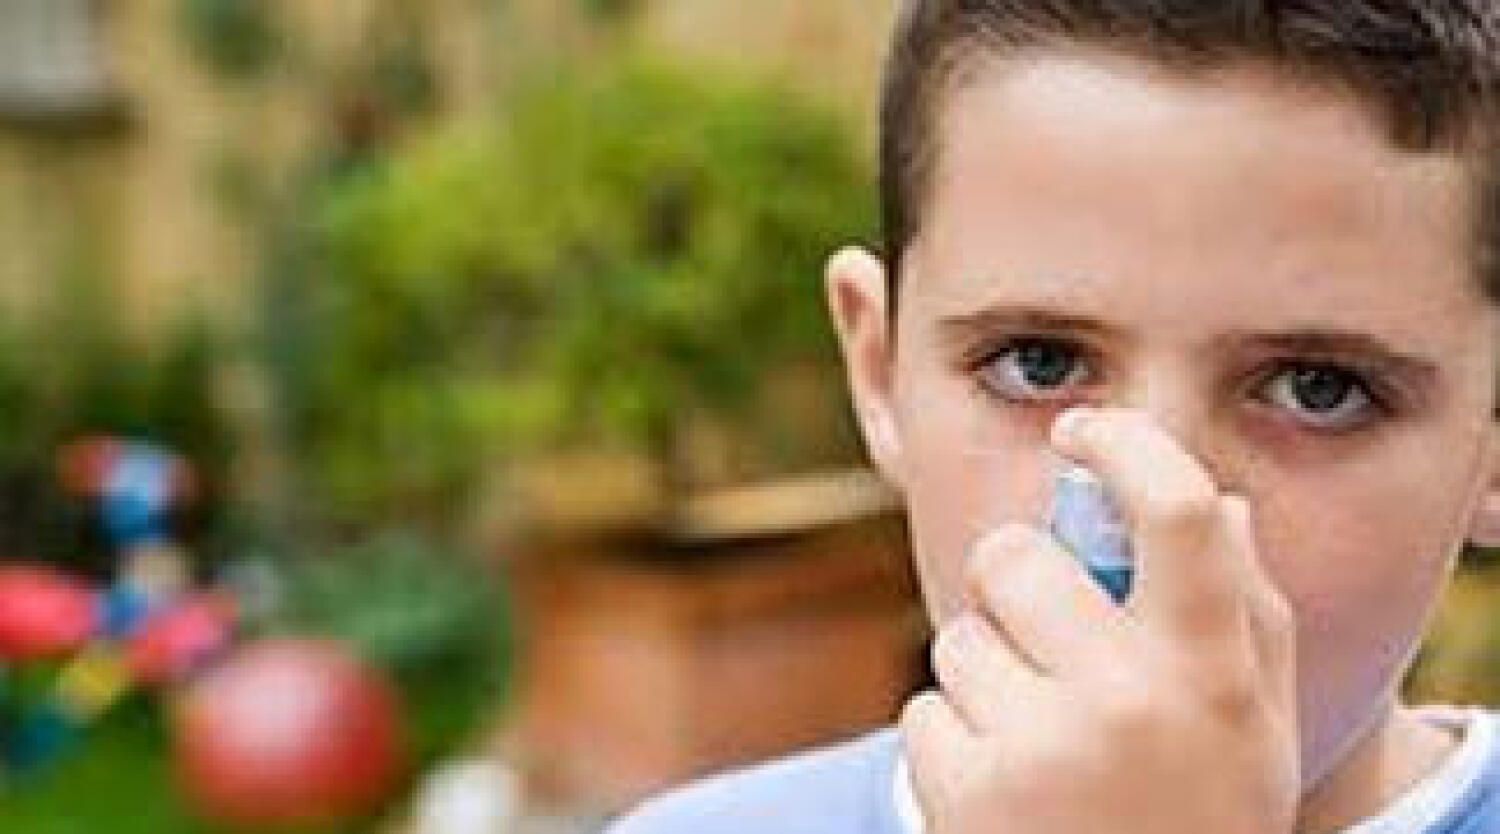 UAE doctors urge parents to be cautious of early signs of asthma in children